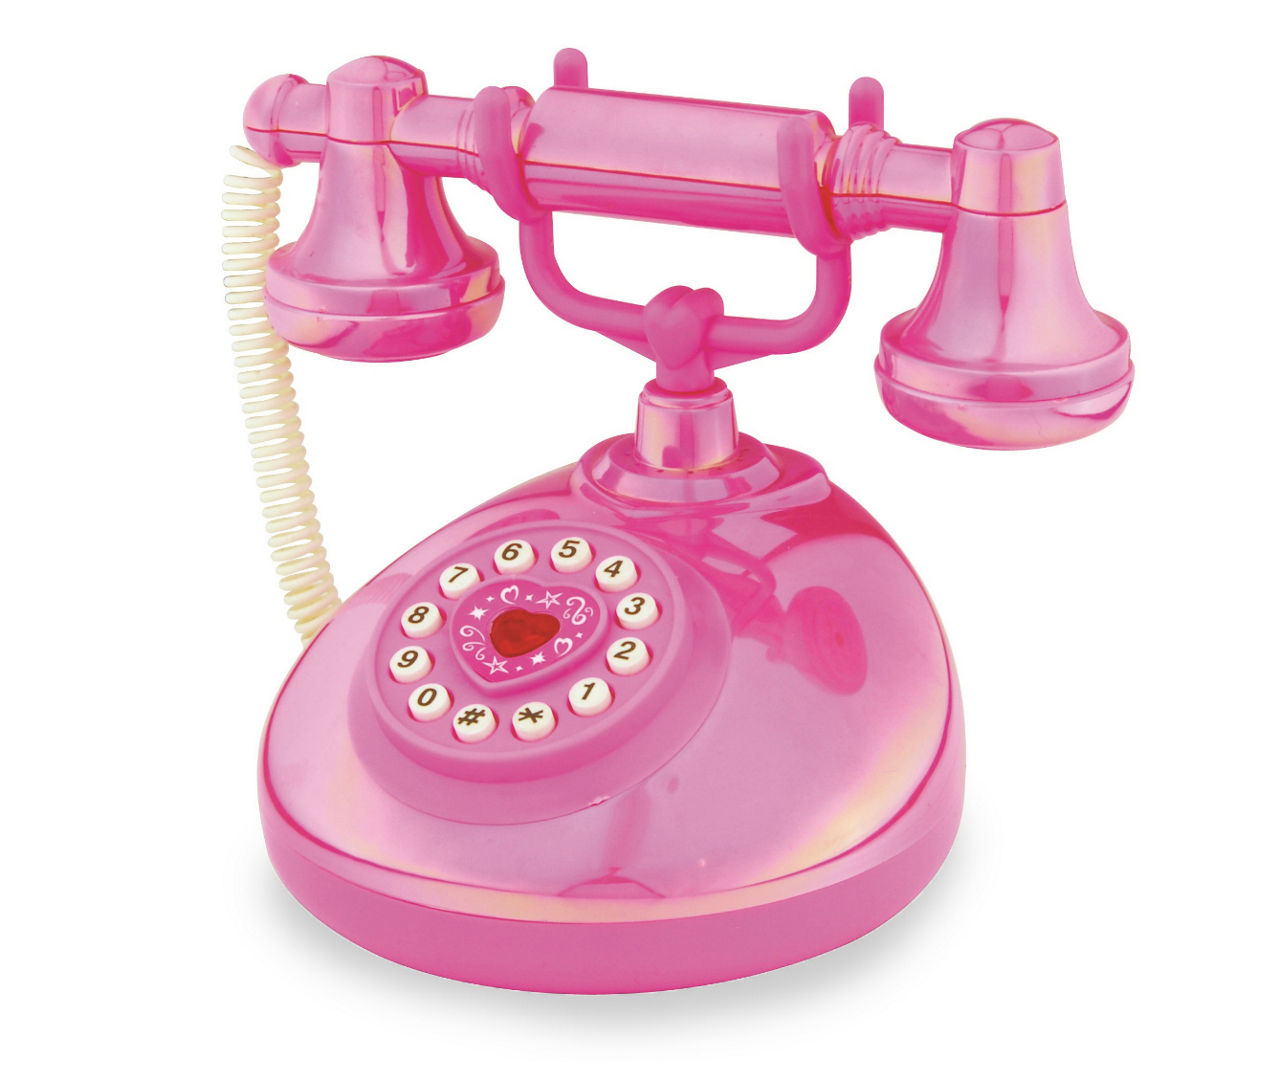 Play Zone Pink Classic Talking Telephone Toy | Big Lots